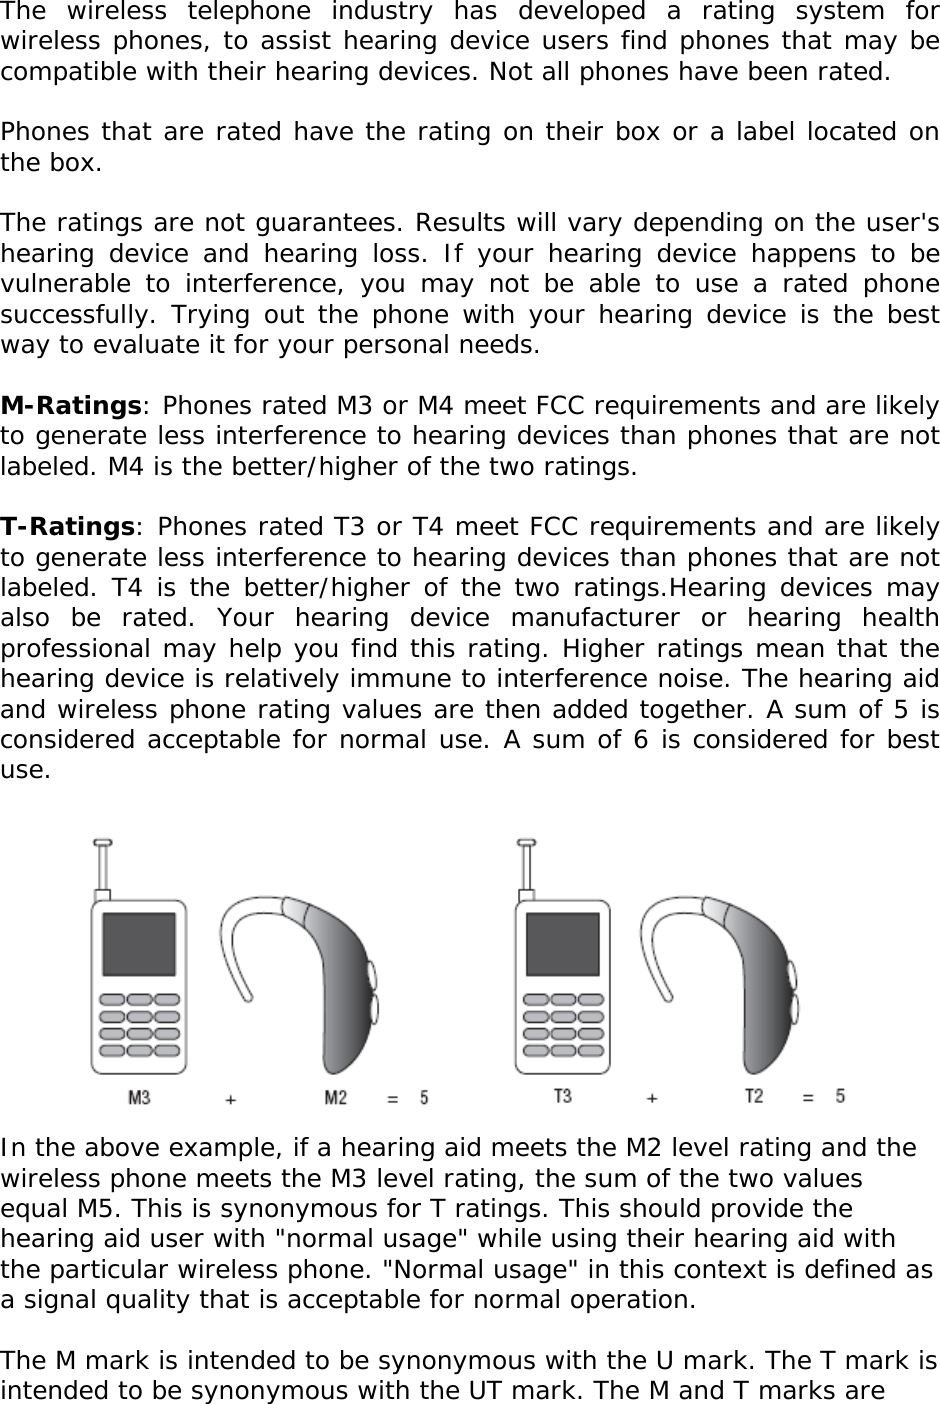 The wireless telephone industry has developed a rating system for wireless phones, to assist hearing device users find phones that may be compatible with their hearing devices. Not all phones have been rated.    Phones that are rated have the rating on their box or a label located on the box.   The ratings are not guarantees. Results will vary depending on the user&apos;s hearing device and hearing loss. If your hearing device happens to be vulnerable to interference, you may not be able to use a rated phone successfully. Trying out the phone with your hearing device is the best way to evaluate it for your personal needs.  M-Ratings: Phones rated M3 or M4 meet FCC requirements and are likely to generate less interference to hearing devices than phones that are not labeled. M4 is the better/higher of the two ratings.  T-Ratings: Phones rated T3 or T4 meet FCC requirements and are likely to generate less interference to hearing devices than phones that are not labeled. T4 is the better/higher of the two ratings.Hearing devices may also be rated. Your hearing device manufacturer or hearing health professional may help you find this rating. Higher ratings mean that the hearing device is relatively immune to interference noise. The hearing aid and wireless phone rating values are then added together. A sum of 5 is considered acceptable for normal use. A sum of 6 is considered for best use.   In the above example, if a hearing aid meets the M2 level rating and the wireless phone meets the M3 level rating, the sum of the two values equal M5. This is synonymous for T ratings. This should provide the hearing aid user with &quot;normal usage&quot; while using their hearing aid with the particular wireless phone. &quot;Normal usage&quot; in this context is defined as a signal quality that is acceptable for normal operation.  The M mark is intended to be synonymous with the U mark. The T mark is intended to be synonymous with the UT mark. The M and T marks are 